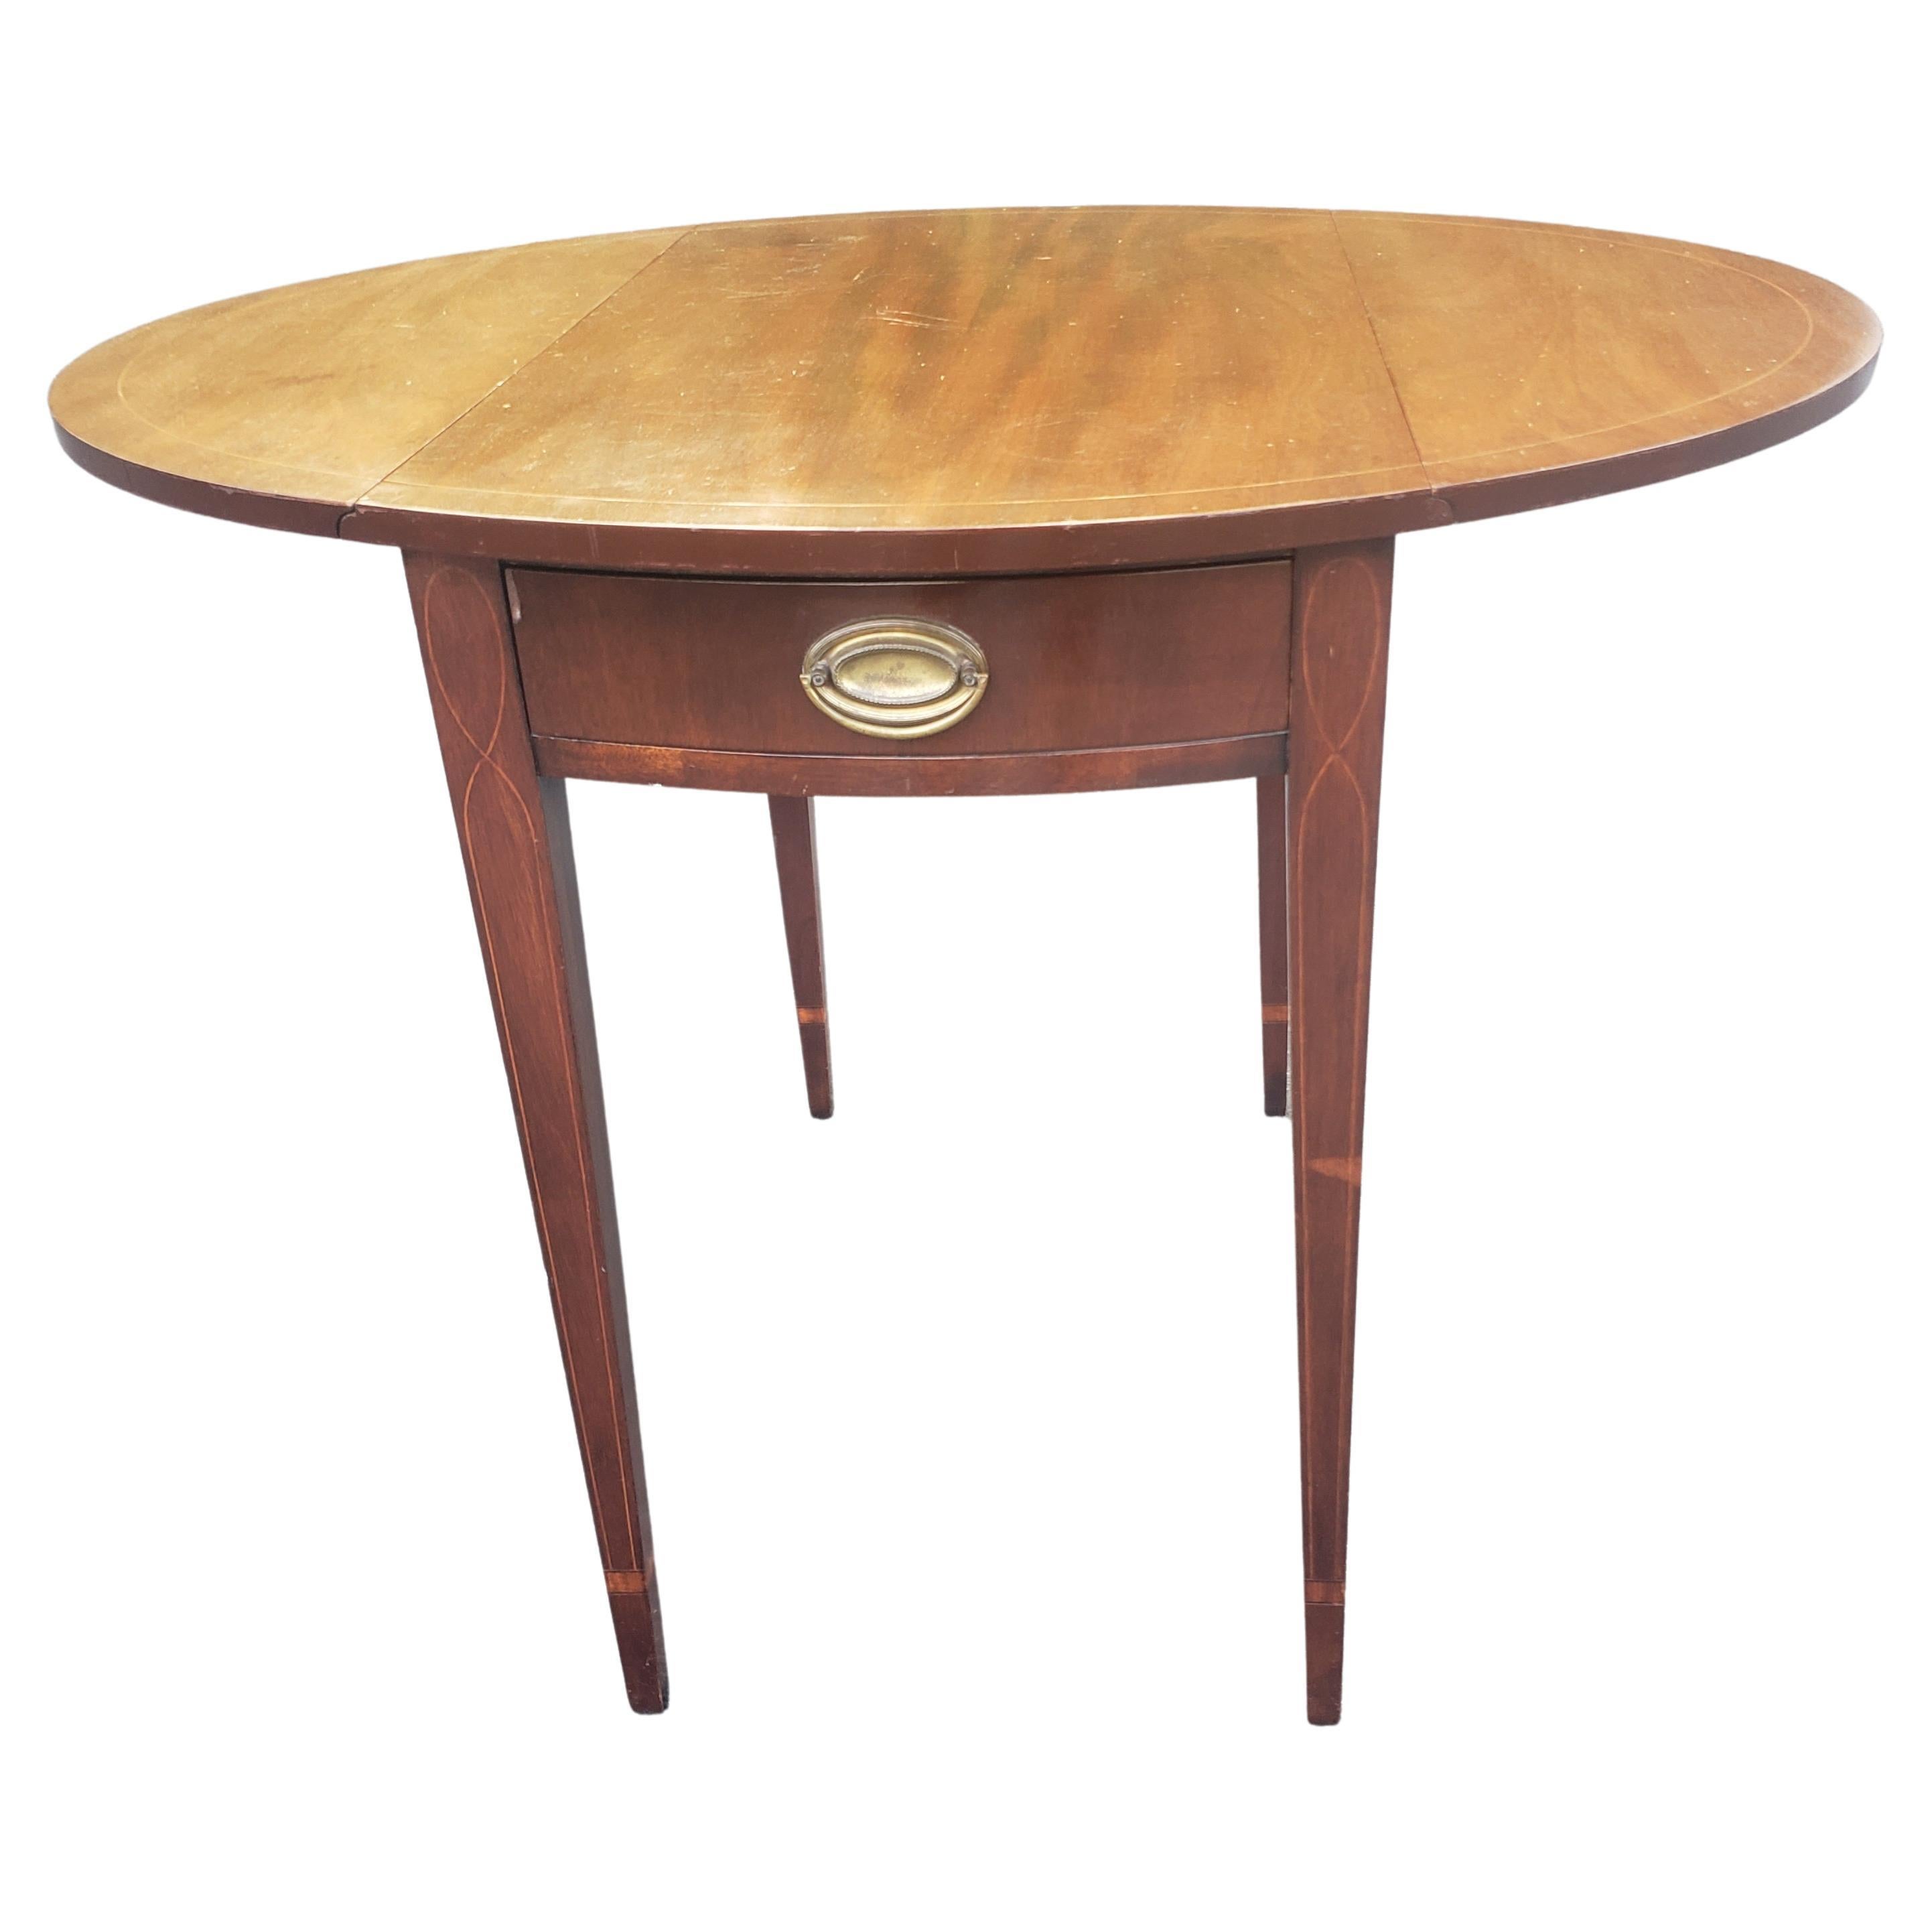 Georgian 1940s Federal Mahohany and Satinwood Inlaid Pembroke Side Table For Sale